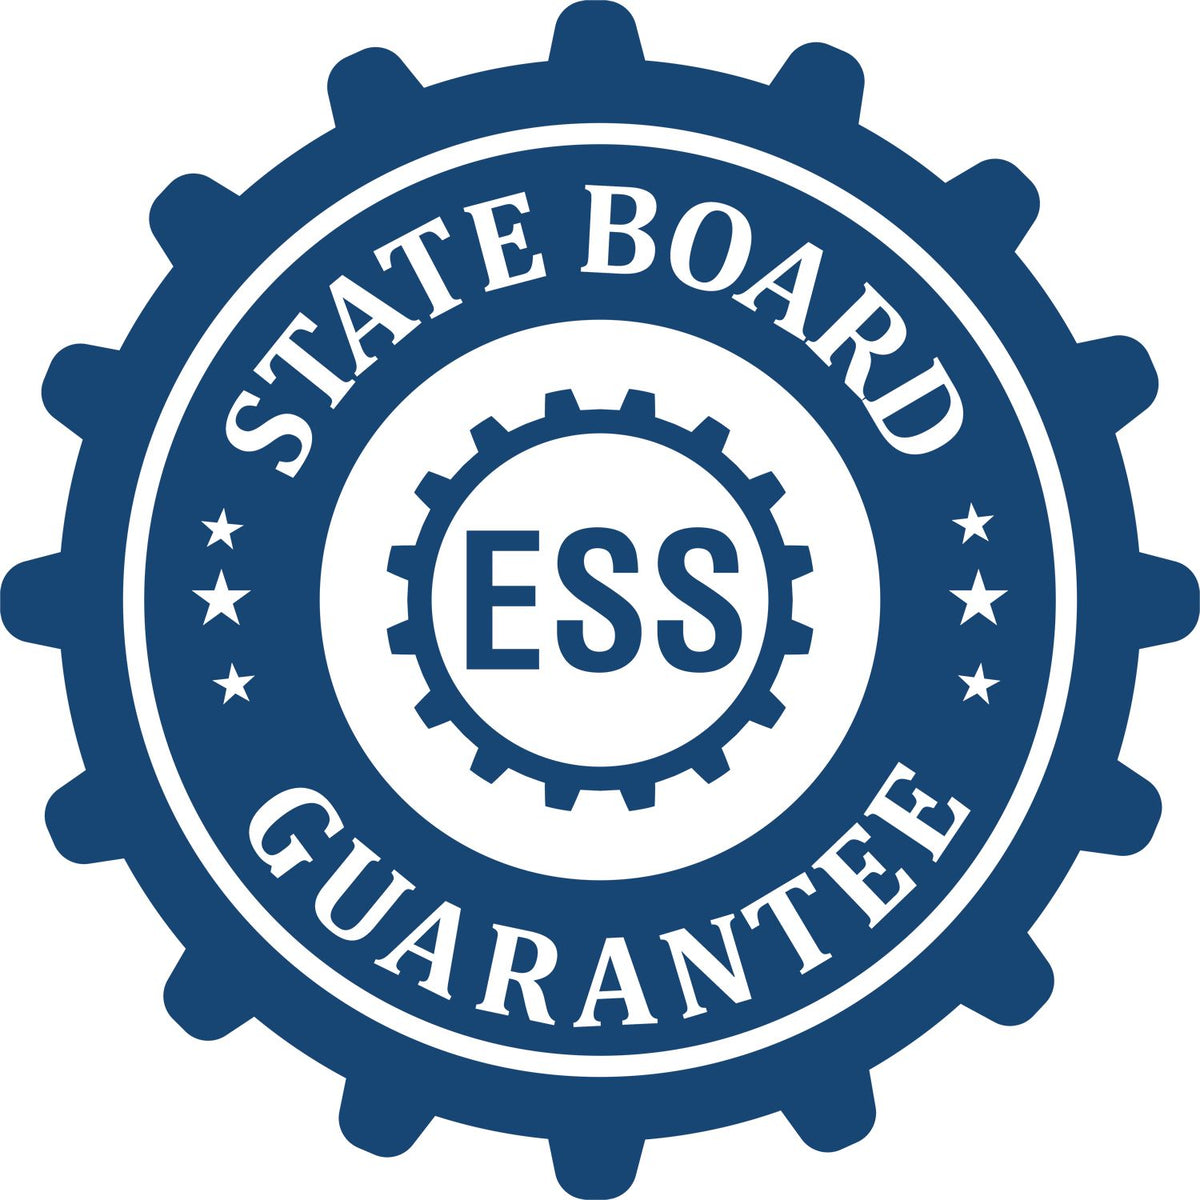 An emblem in a gear shape illustrating a state board guarantee for the Premium MaxLight Pre-Inked Maine Landscape Architectural Stamp product.